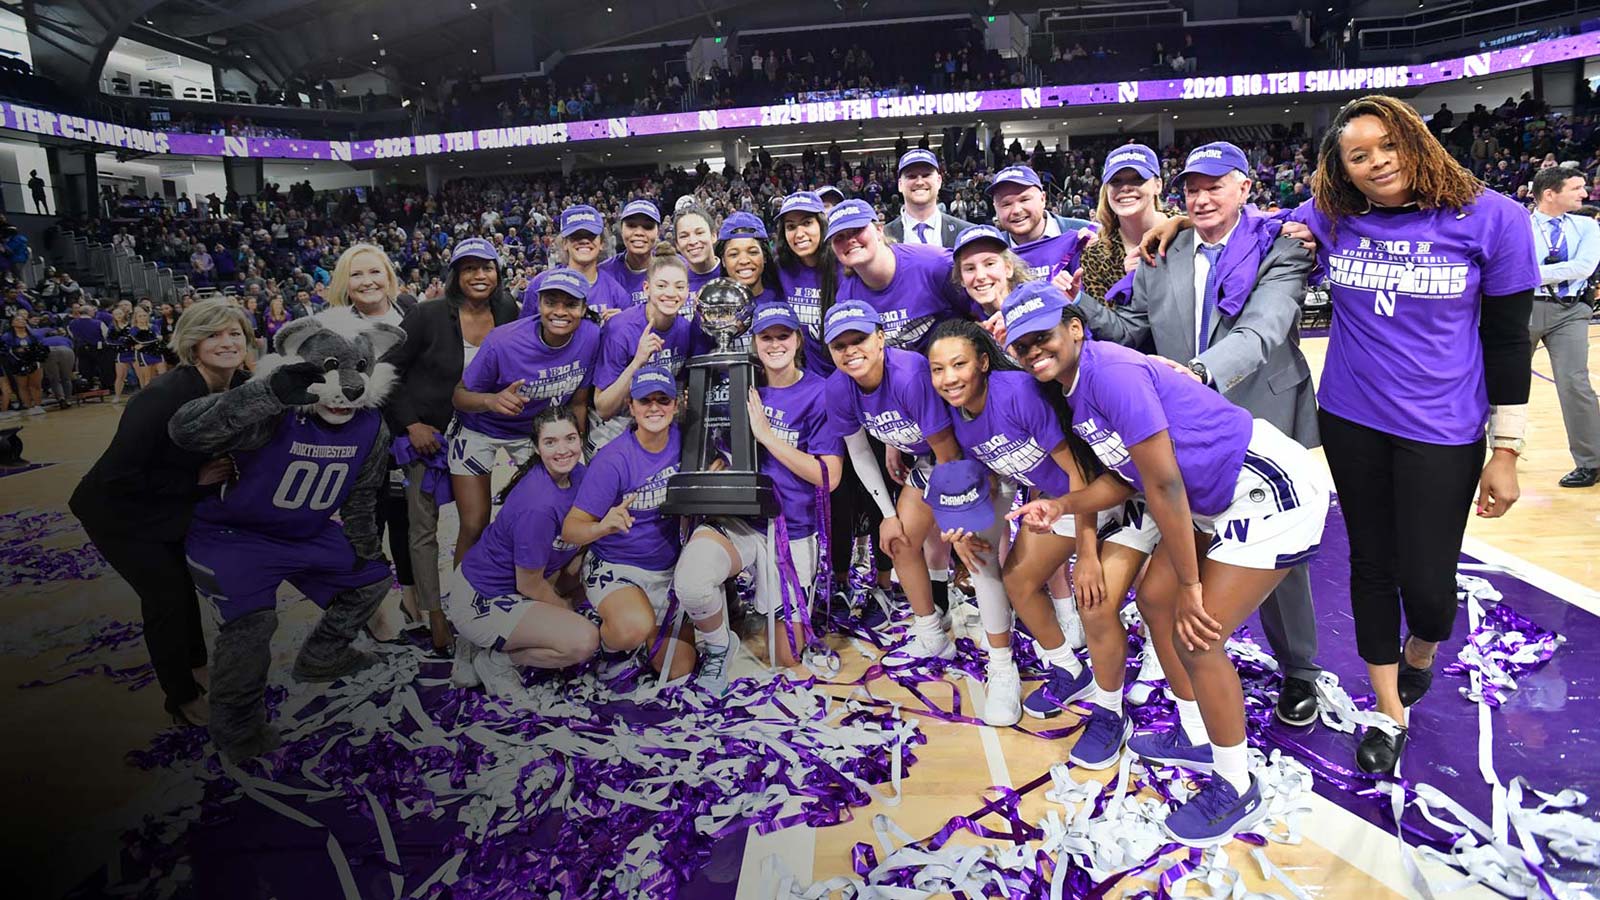 Women's basketball players holding a trophy on the court